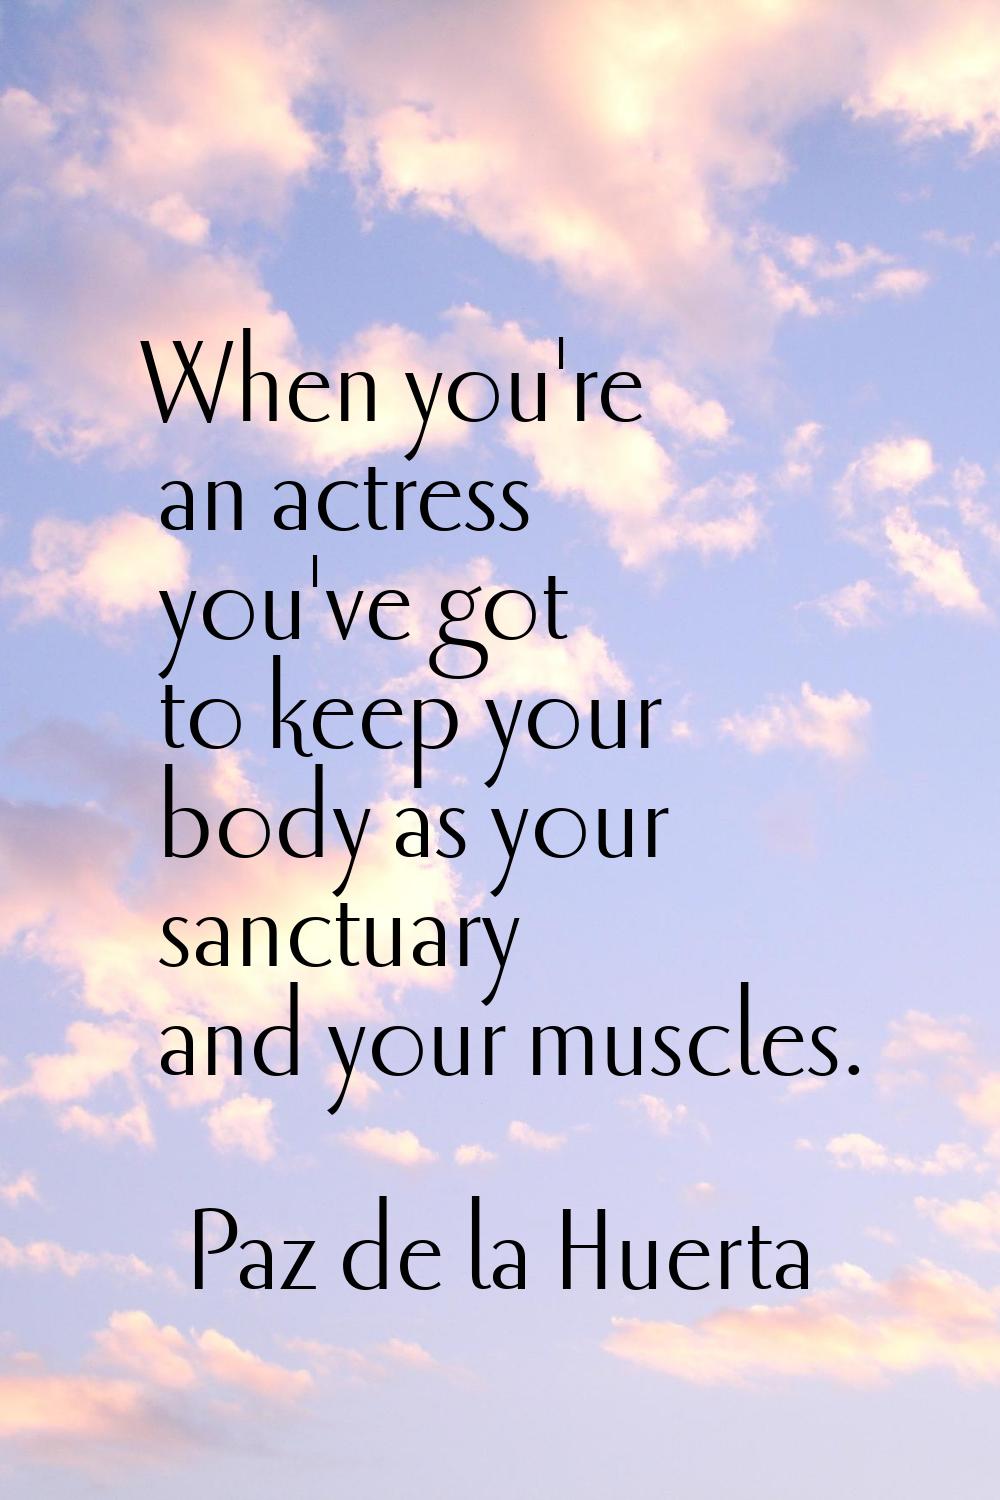 When you're an actress you've got to keep your body as your sanctuary and your muscles.